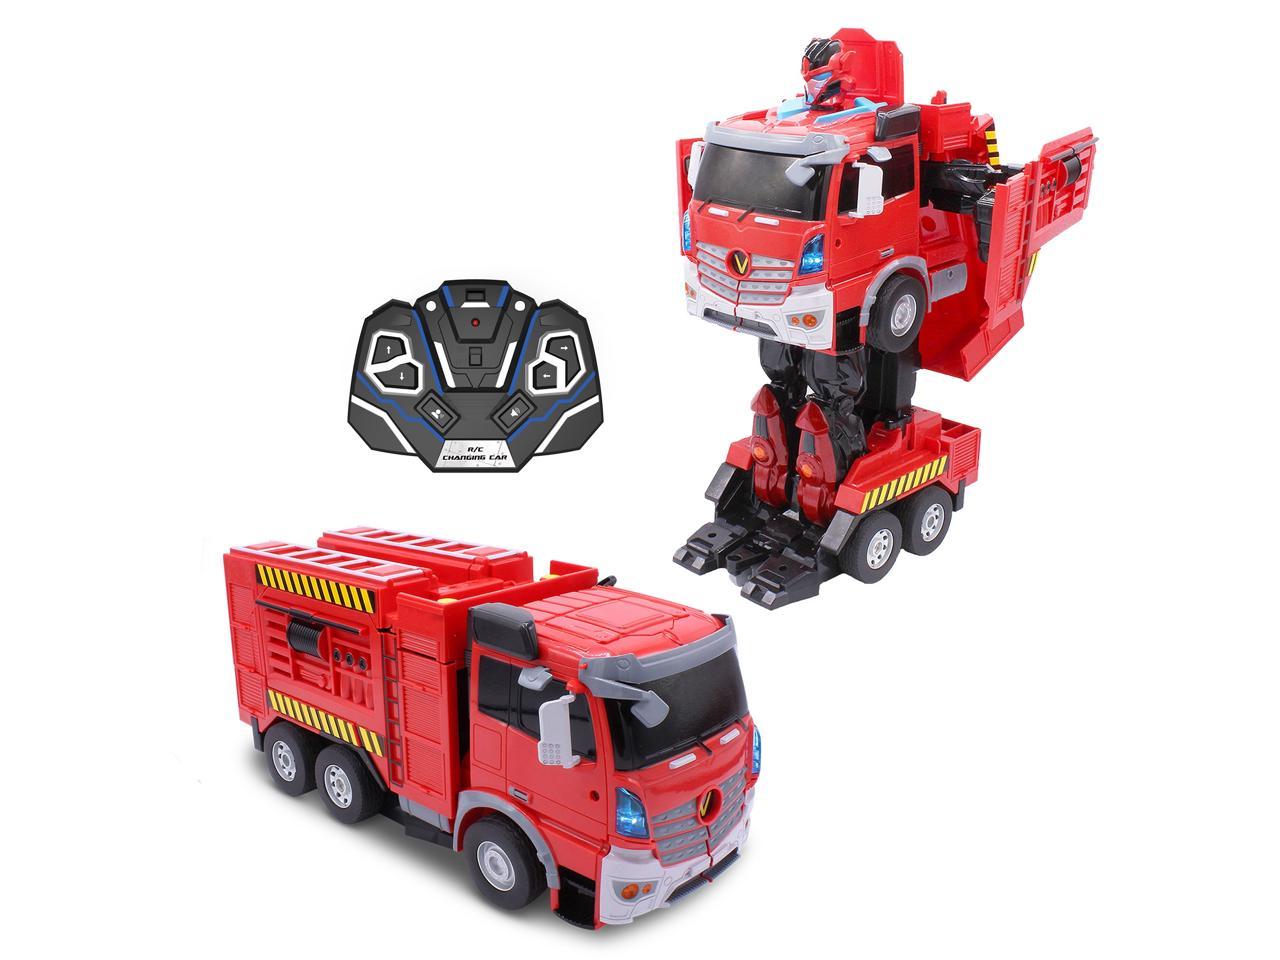 a Lights Prextex RC Remote Control Fire Truck Toy for Kids with Remote Control